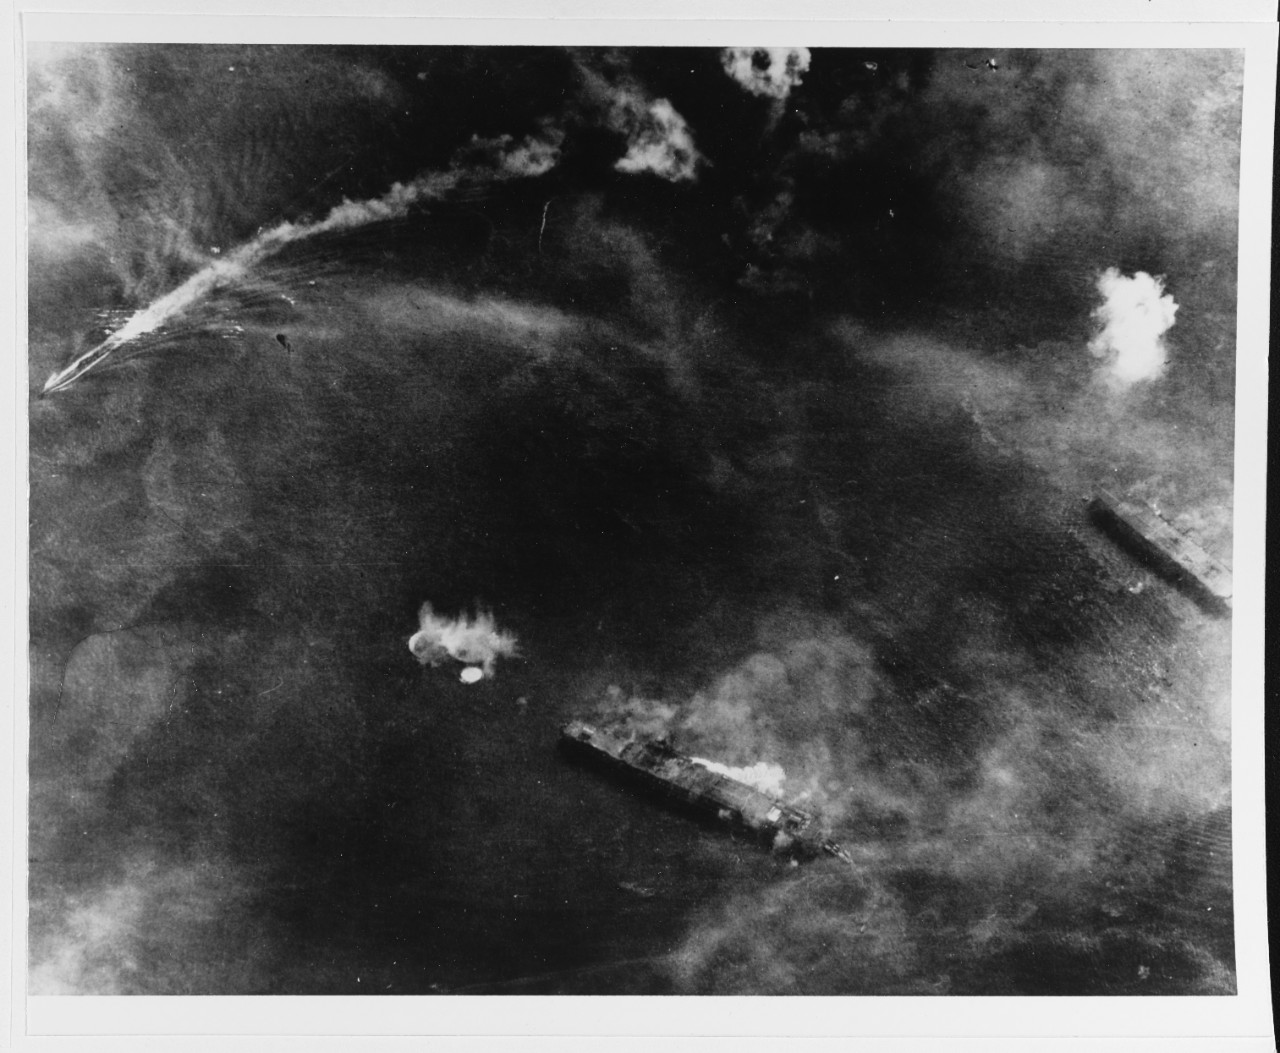 Photo #: 80-G-309660  Carrier Raids on Japan, March 1945